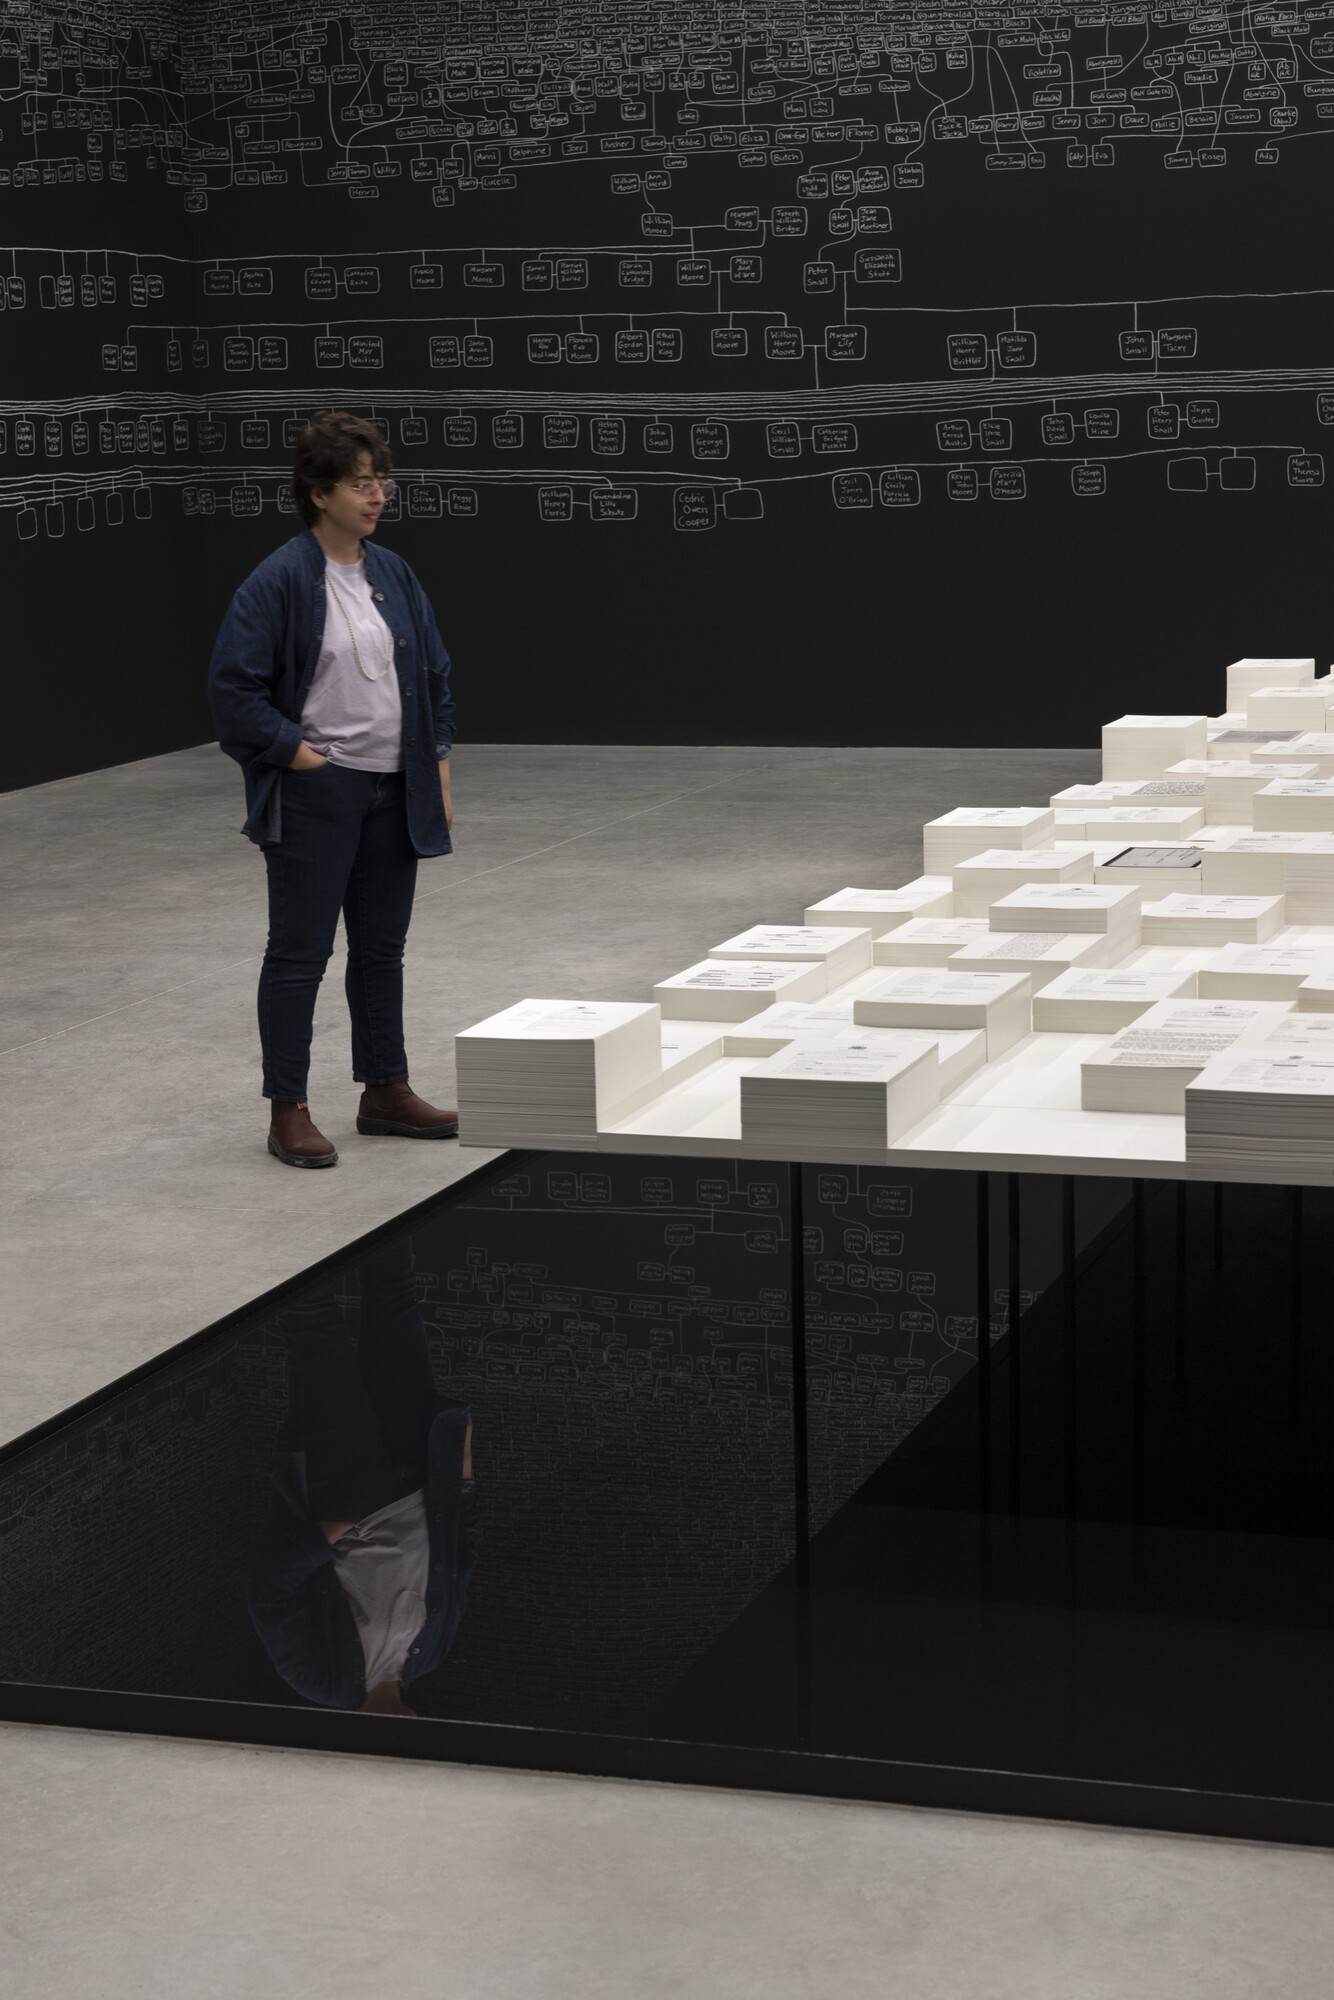 <p>Tahmina Maskinyar viewing Archie Moore, <em>kith and kin</em> 2024. Curated by Ellie Buttrose. Australia Pavilion at Venice Biennale 2024. Project team: Adrian Collette am, Diego Carpentiero, Gillian Mercer, Mikala Tai, Niwa Mburuja, Tahjee Moar, Tahmina Maskinyar, with the support from the wider Creative Australia team. Photographer: Andrea Rossetti, © the artist. Image courtesy of the artist and The Commercial.</p>